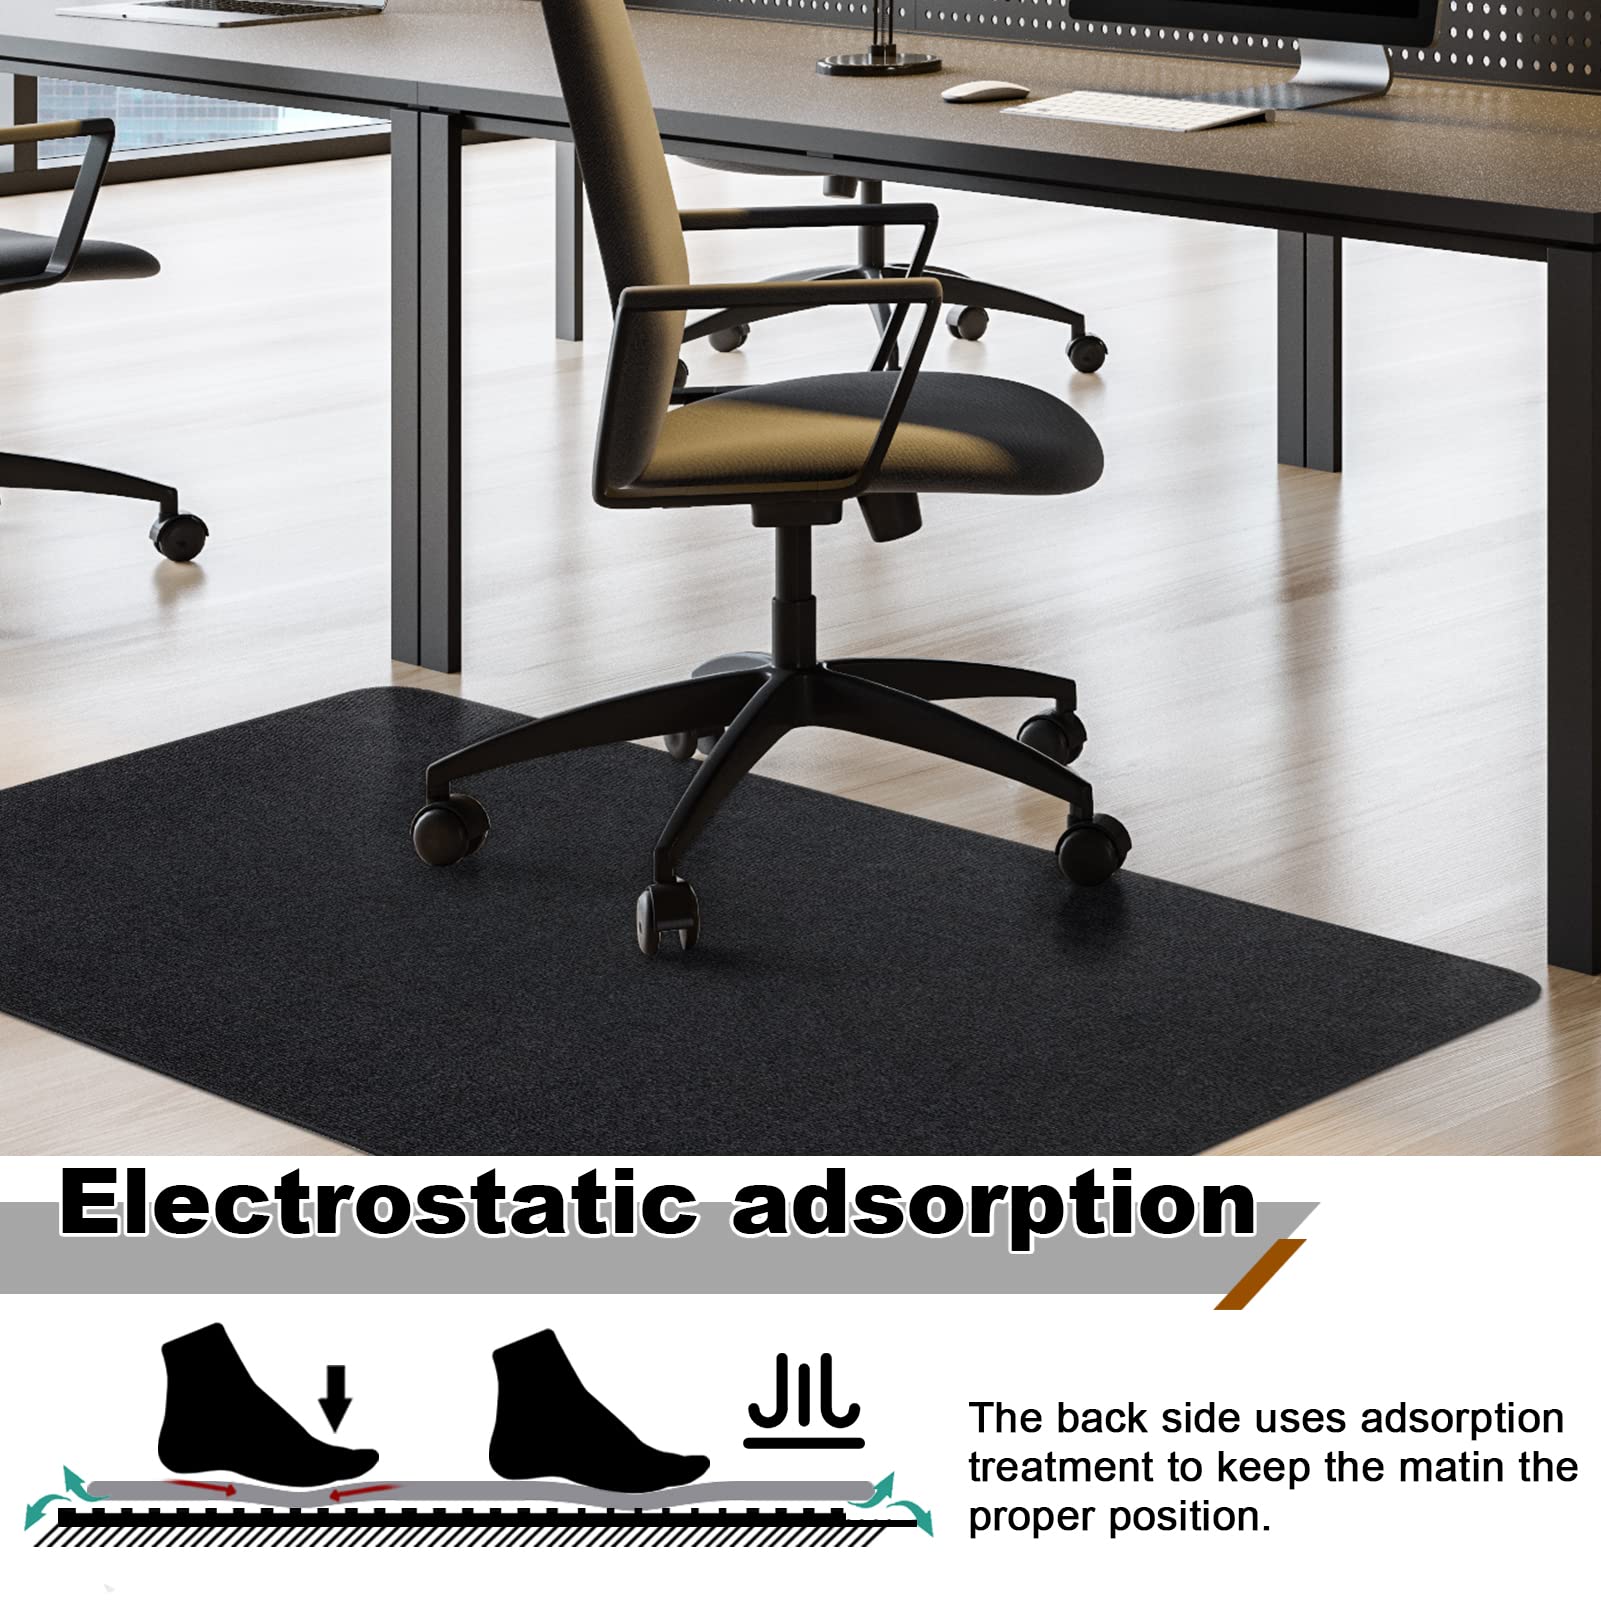 CELION Edging Office Chair Mat for Hardwood & Tile Floor, 55"x35" Computer Gaming Rolling Chair Mat, Under Desk Low-Pile Rug, Large Anti-Slip Floor Protector for Home Office (Black, 55" x 35")